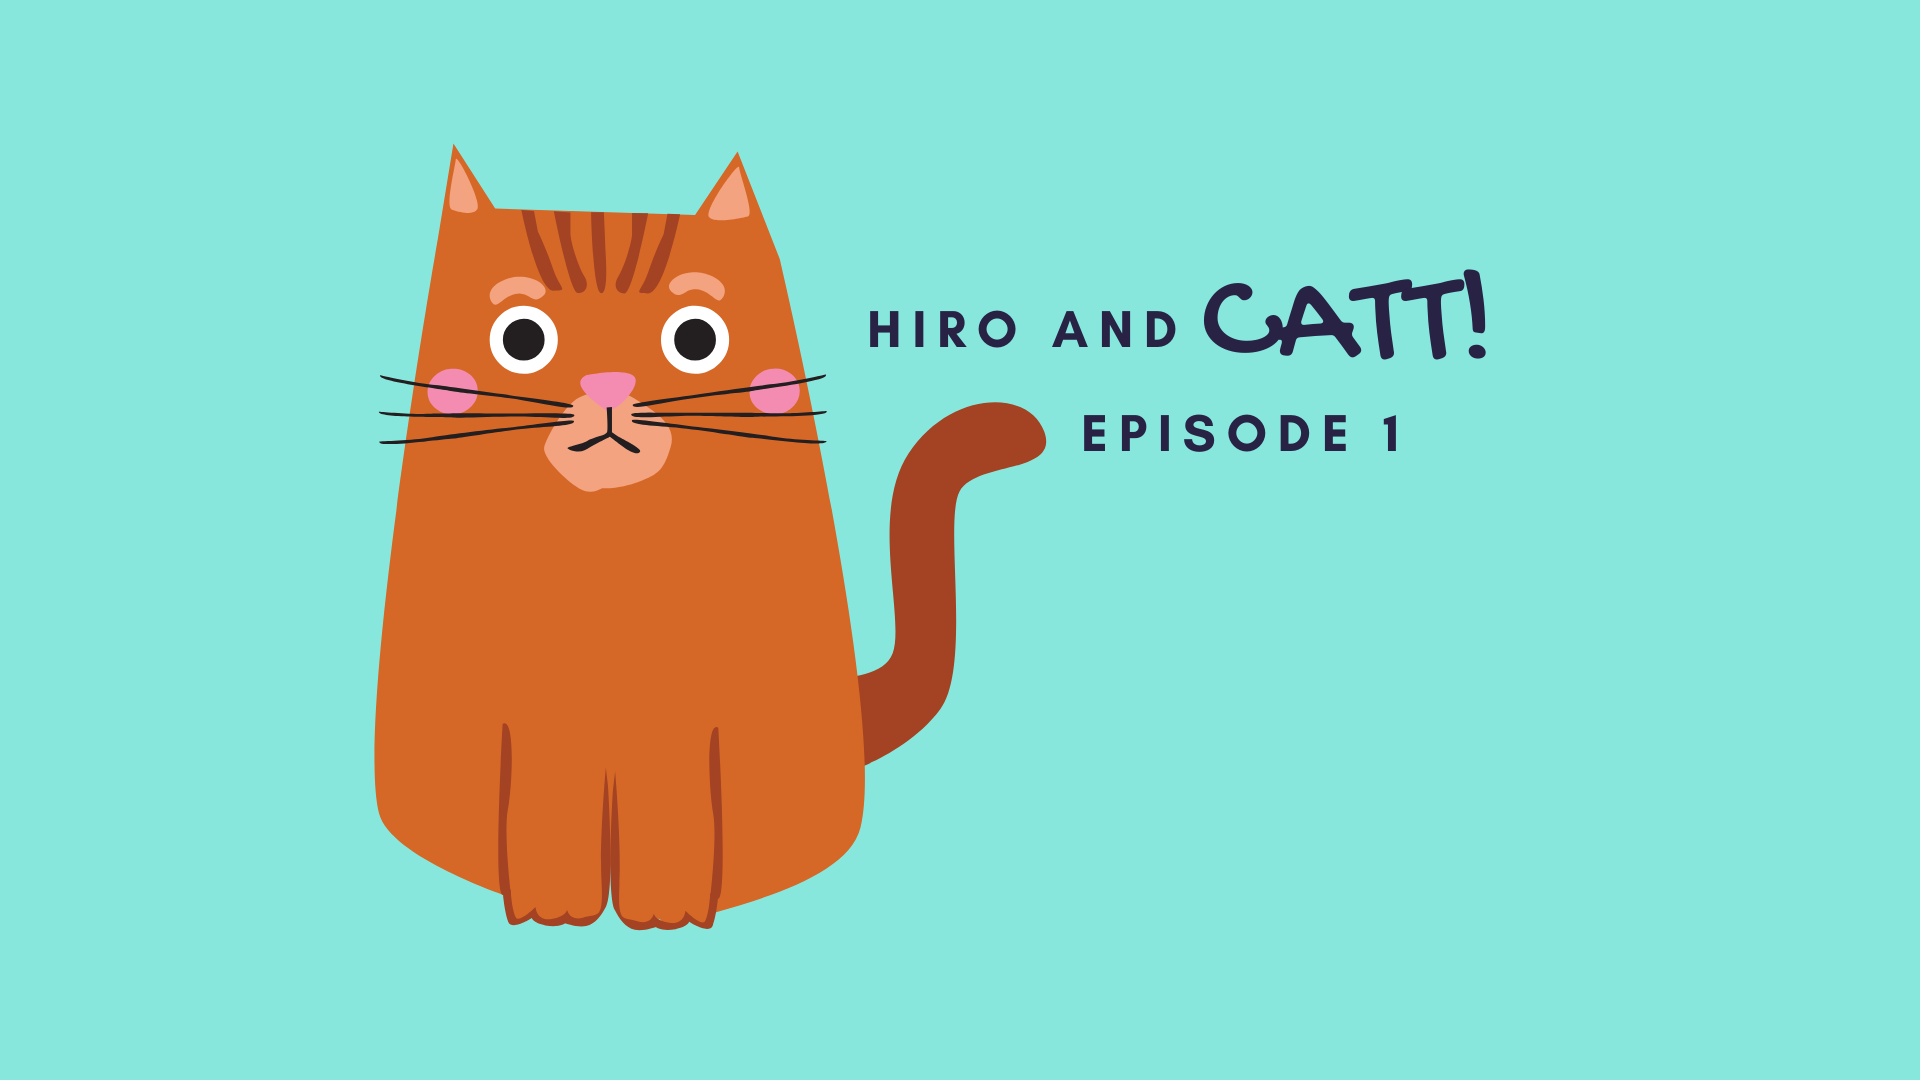 Hiro and Catt - Episode 1 by Glitch Through the Ground